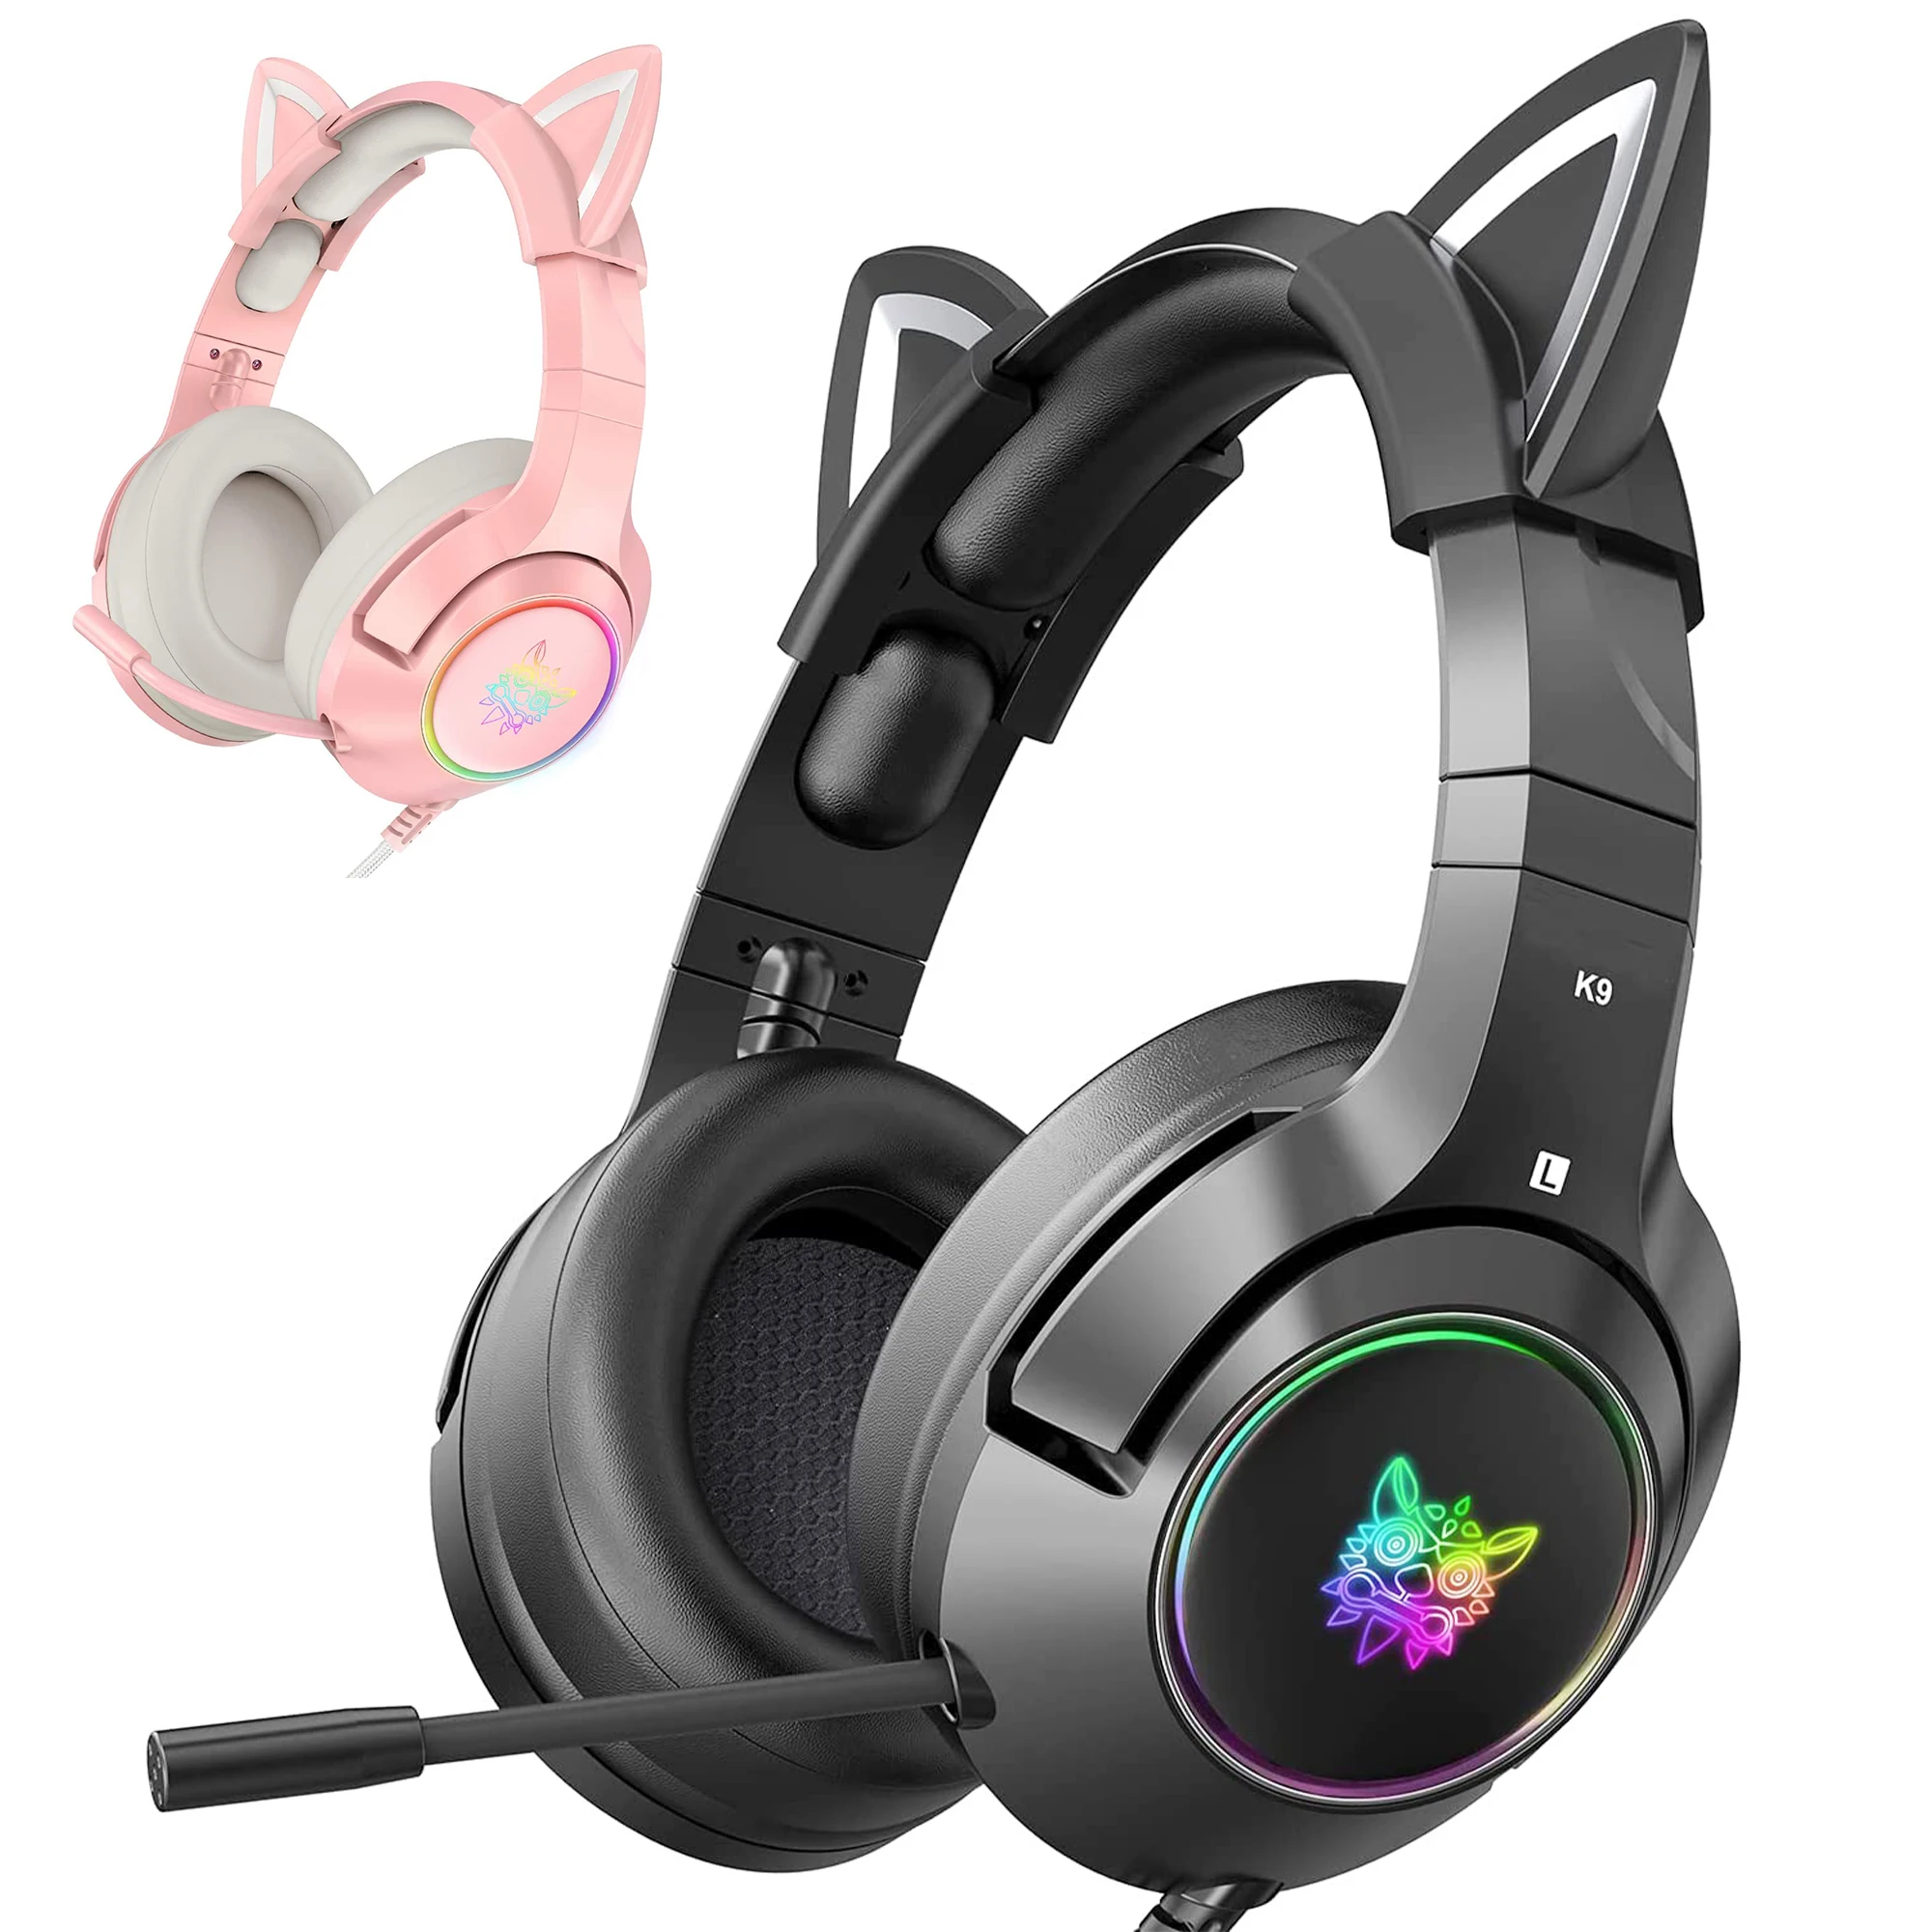 

Gaming Headset with Removable Cat Ears Compatible with PC PS4 PS5 Xbox One Mobile Phones with Surround Sound RGB Backlight & Noi